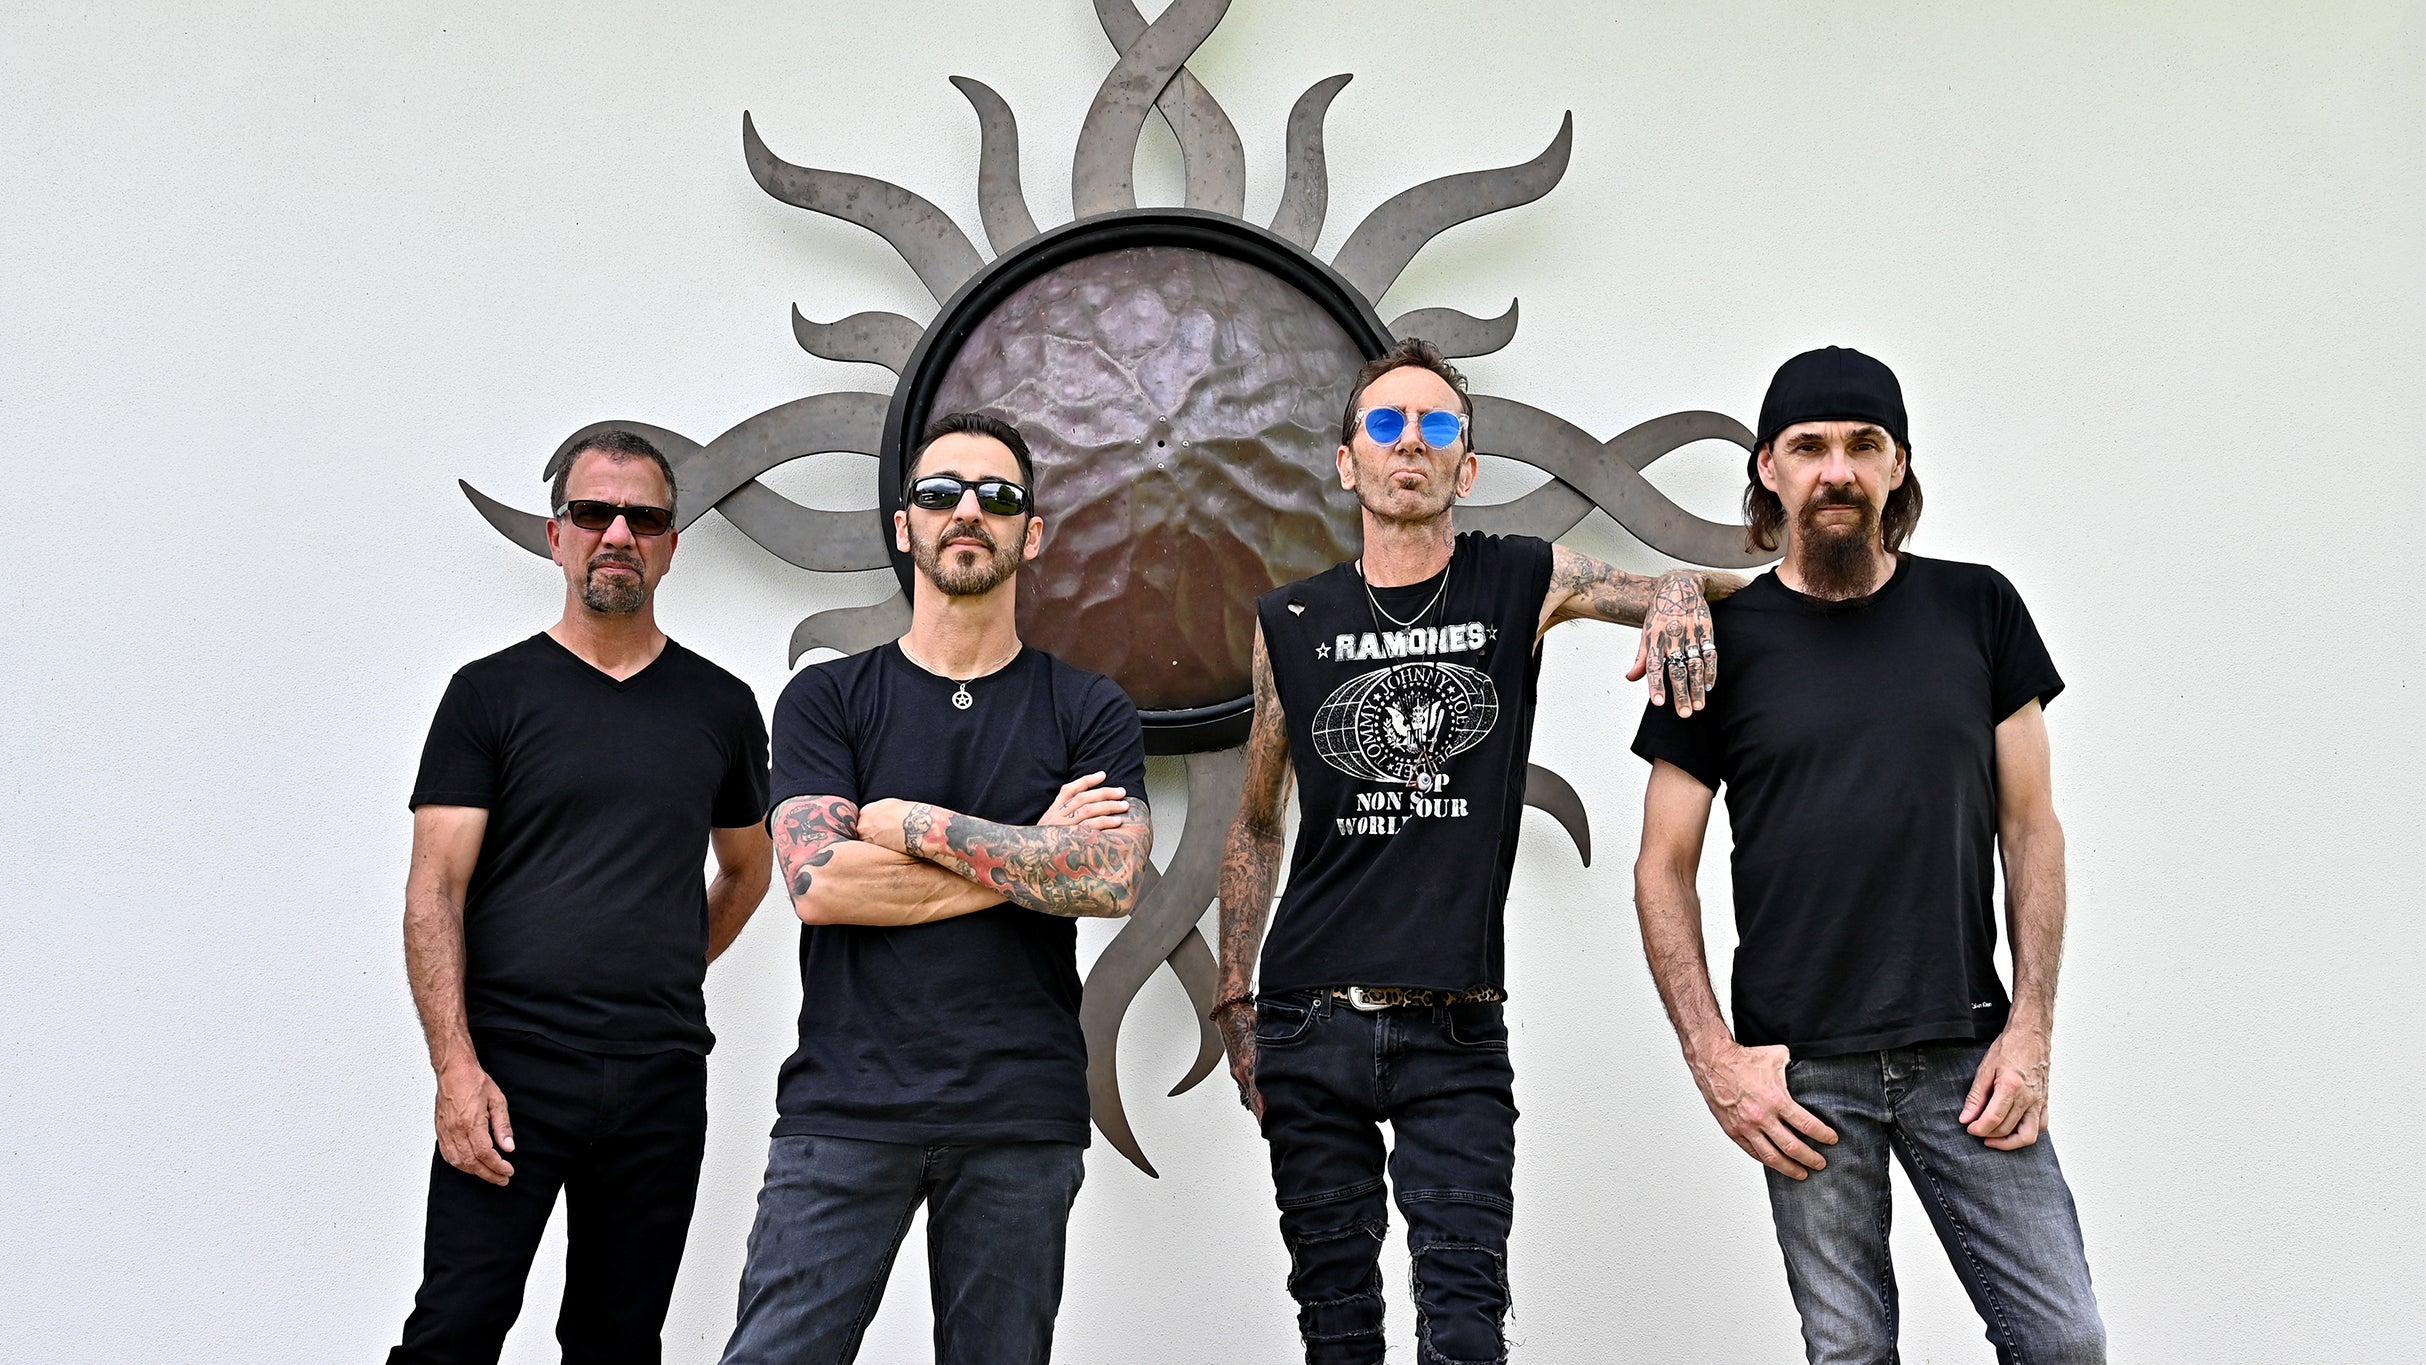 Main image for event titled Vibez Tour - An Intimate Evening With Godsmack